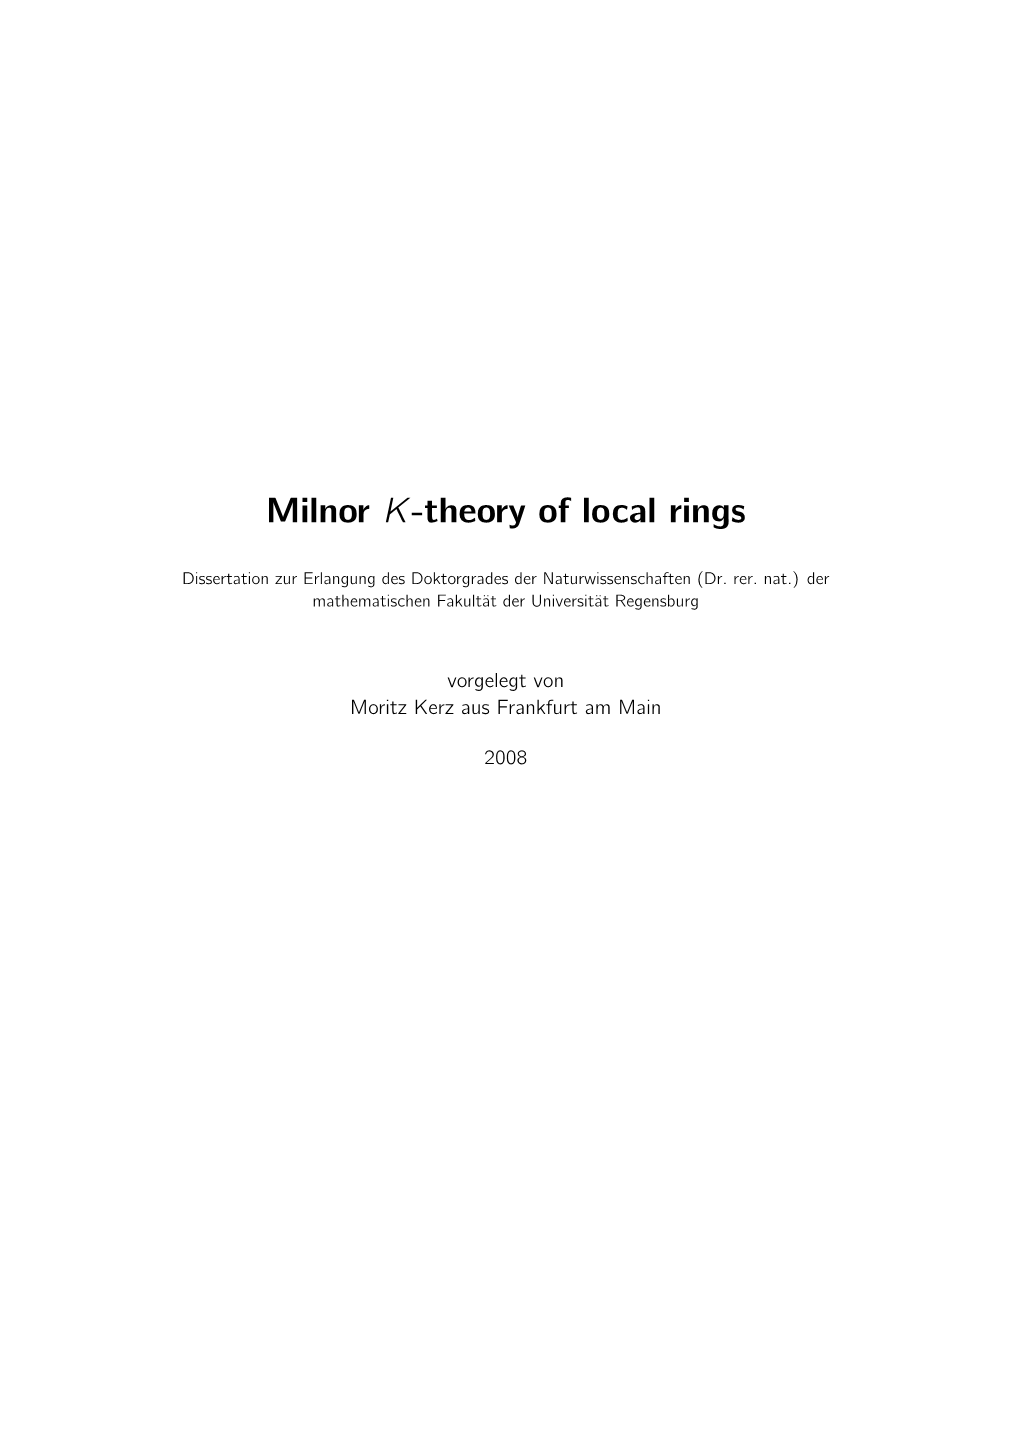 Milnor K-Theory of Local Rings